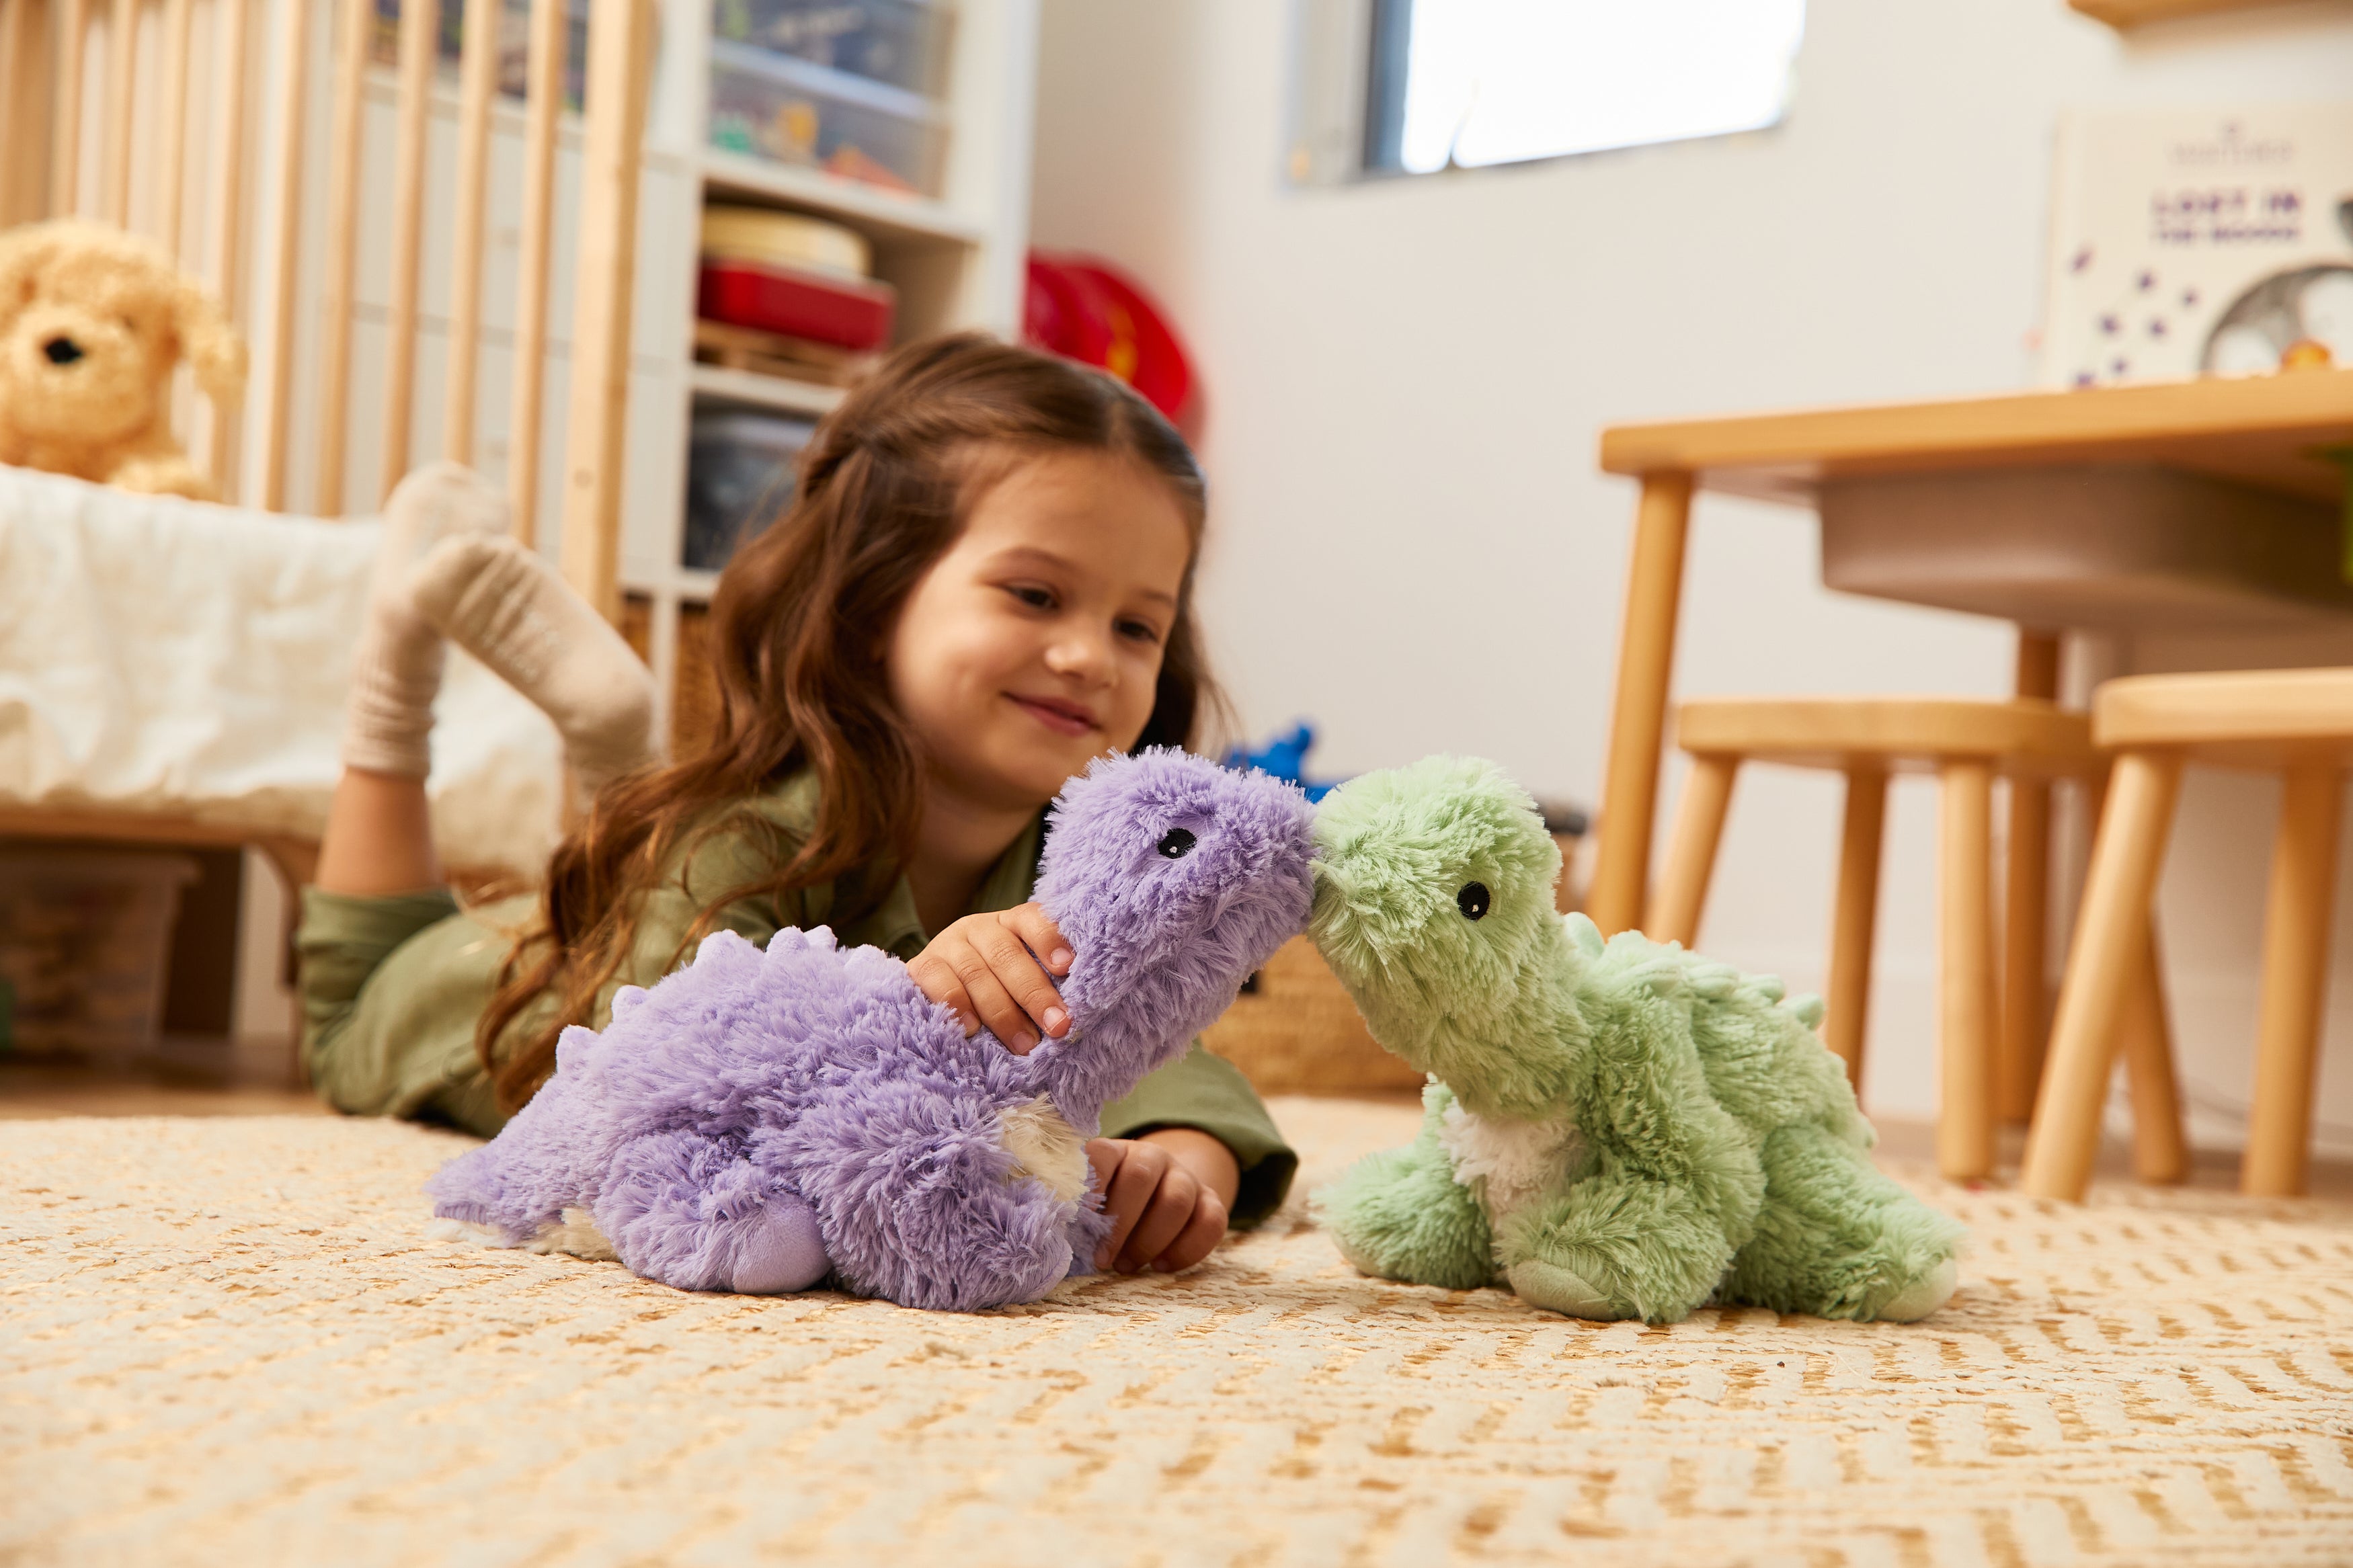 What Is The Best Stuffing For Stuffed Animals?